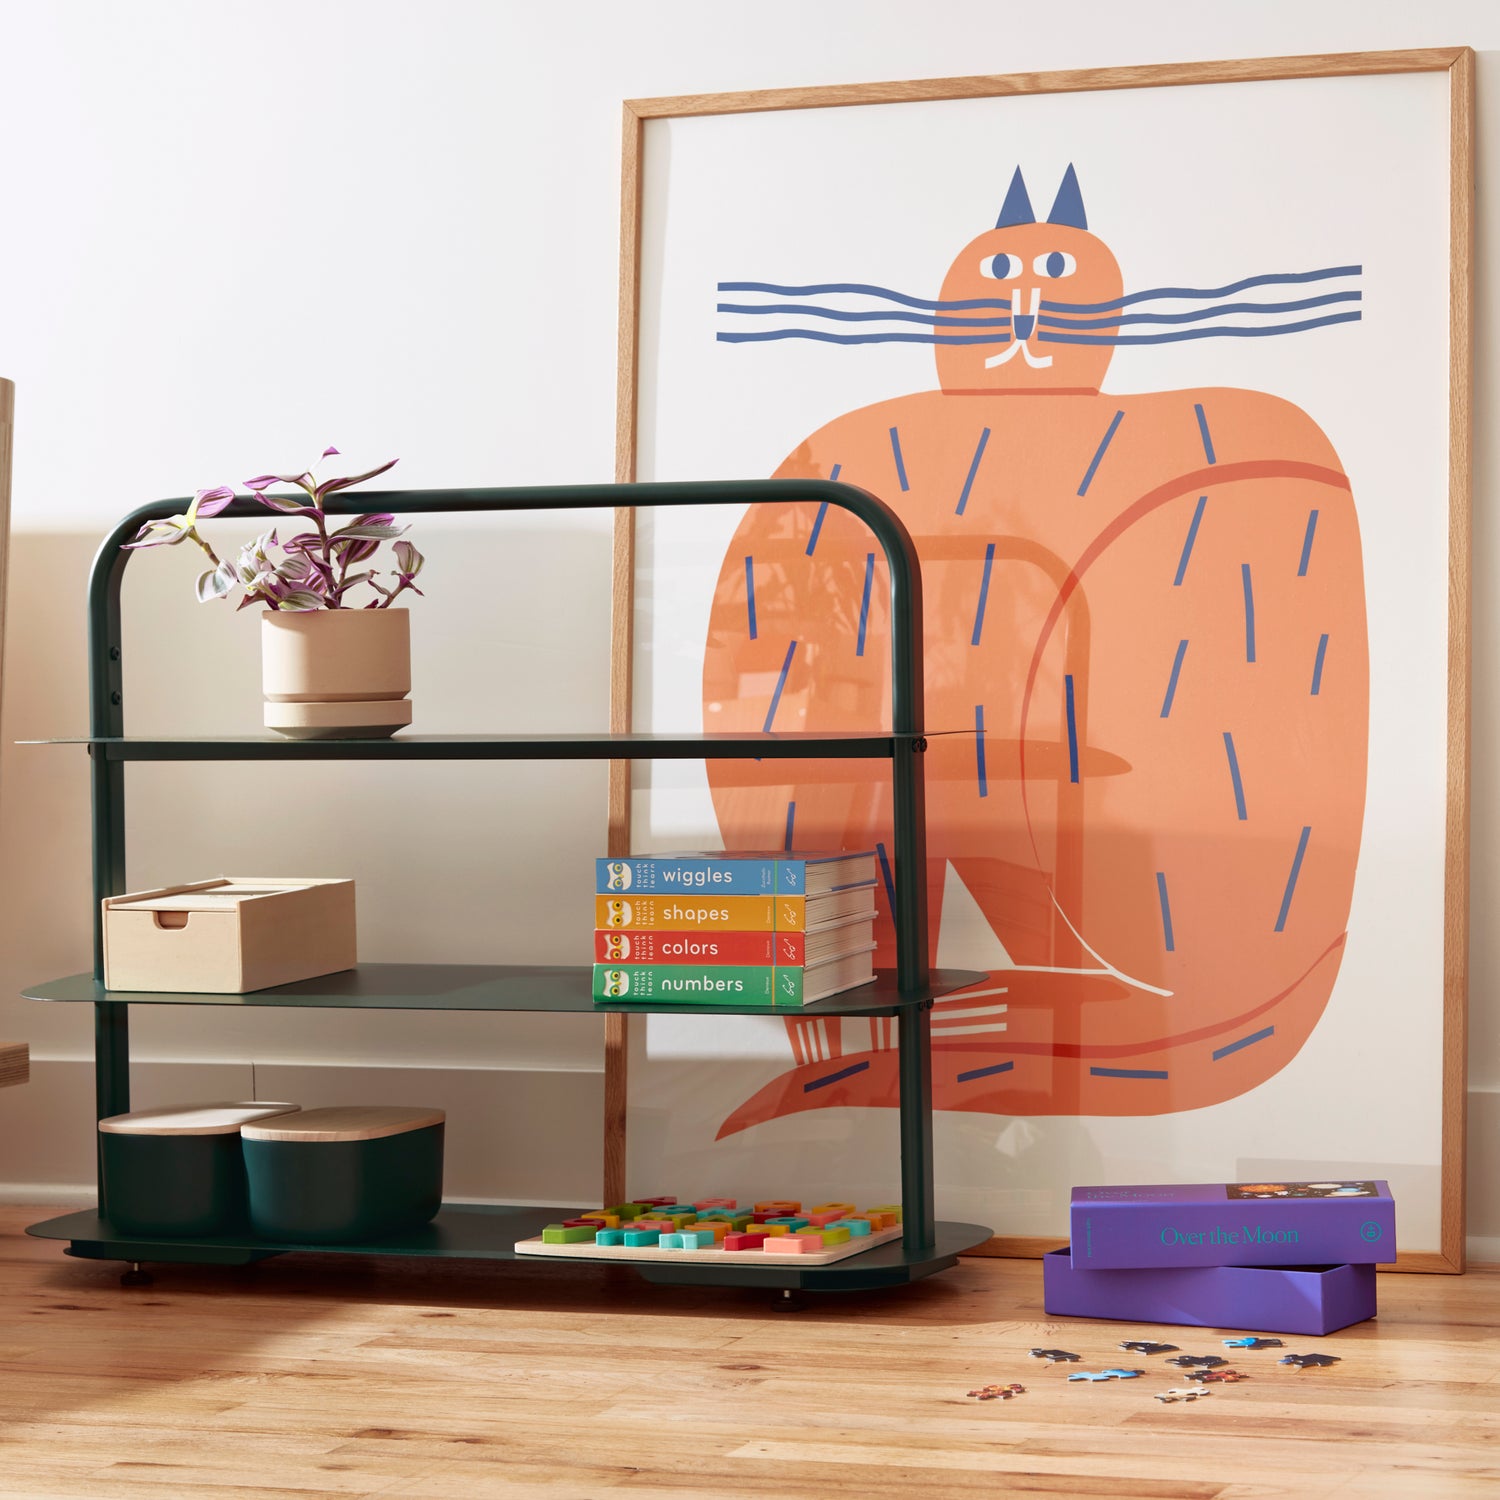 The Dark Green Entry way Rack with items displayed on it on a wooden surface with a painting of a cat on the back.